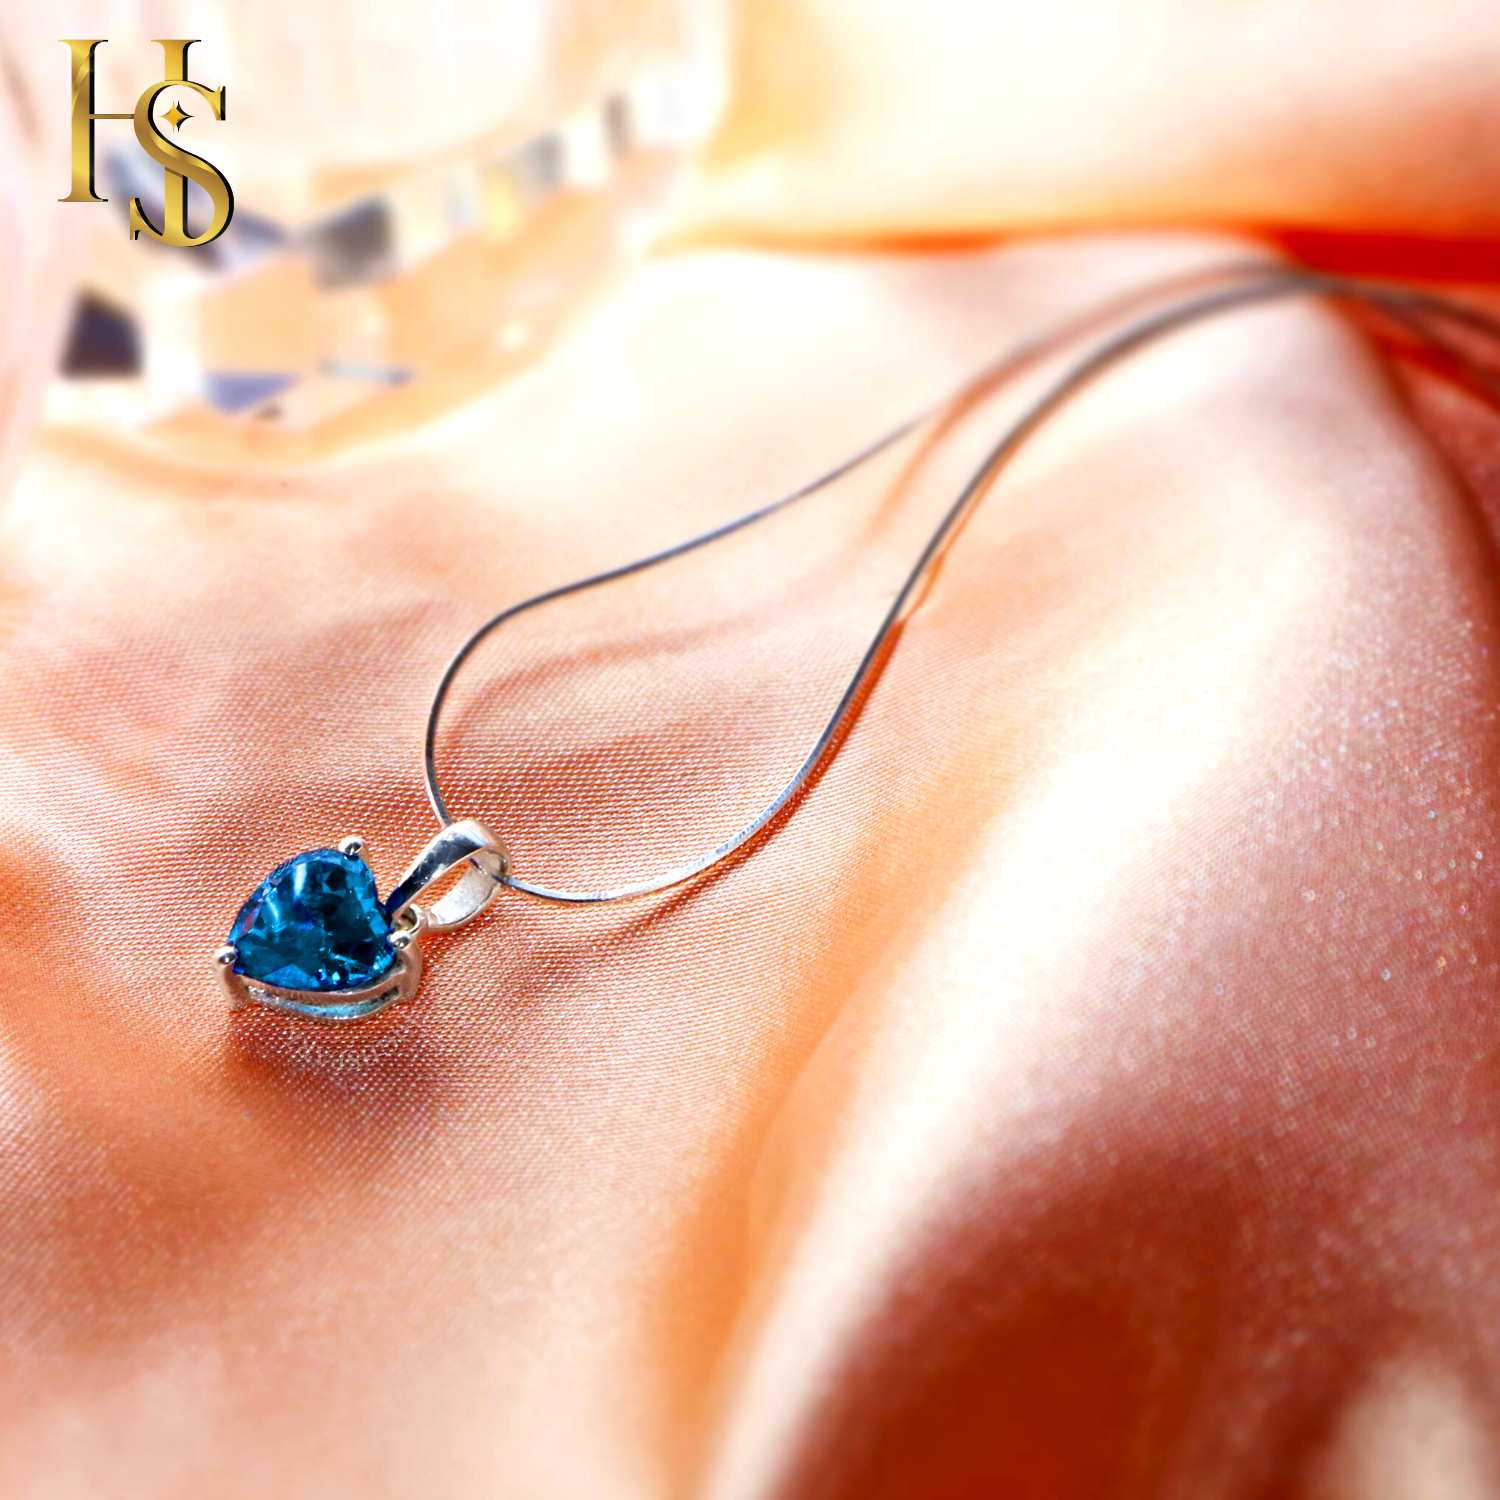 Blue Heart Solitaire Pendant with Chain in 92.5 Silver embellished with Swarovski Zirconia